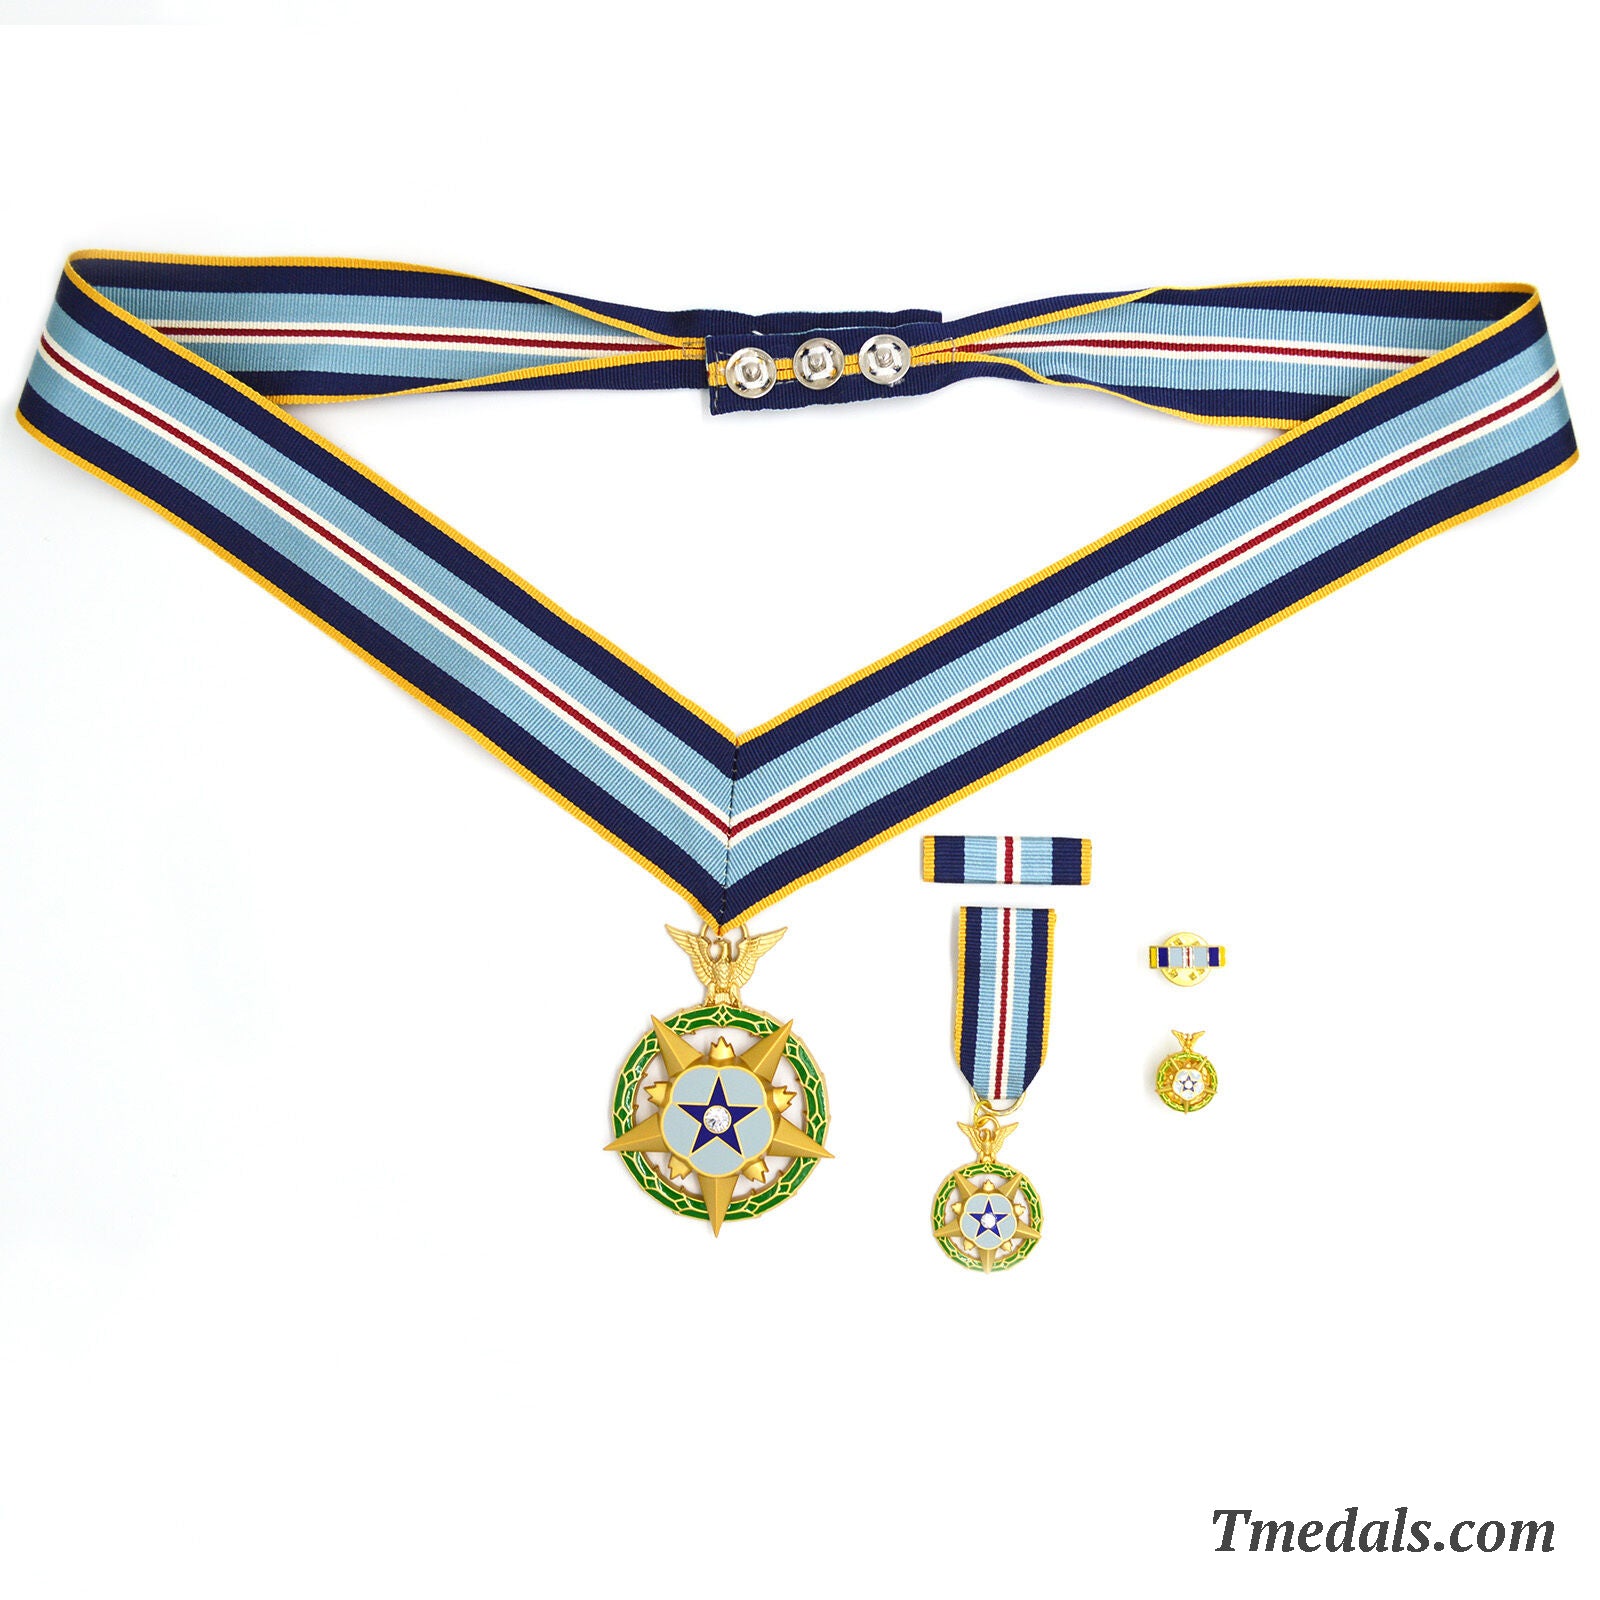 Presidents Medals: Dead Space Design